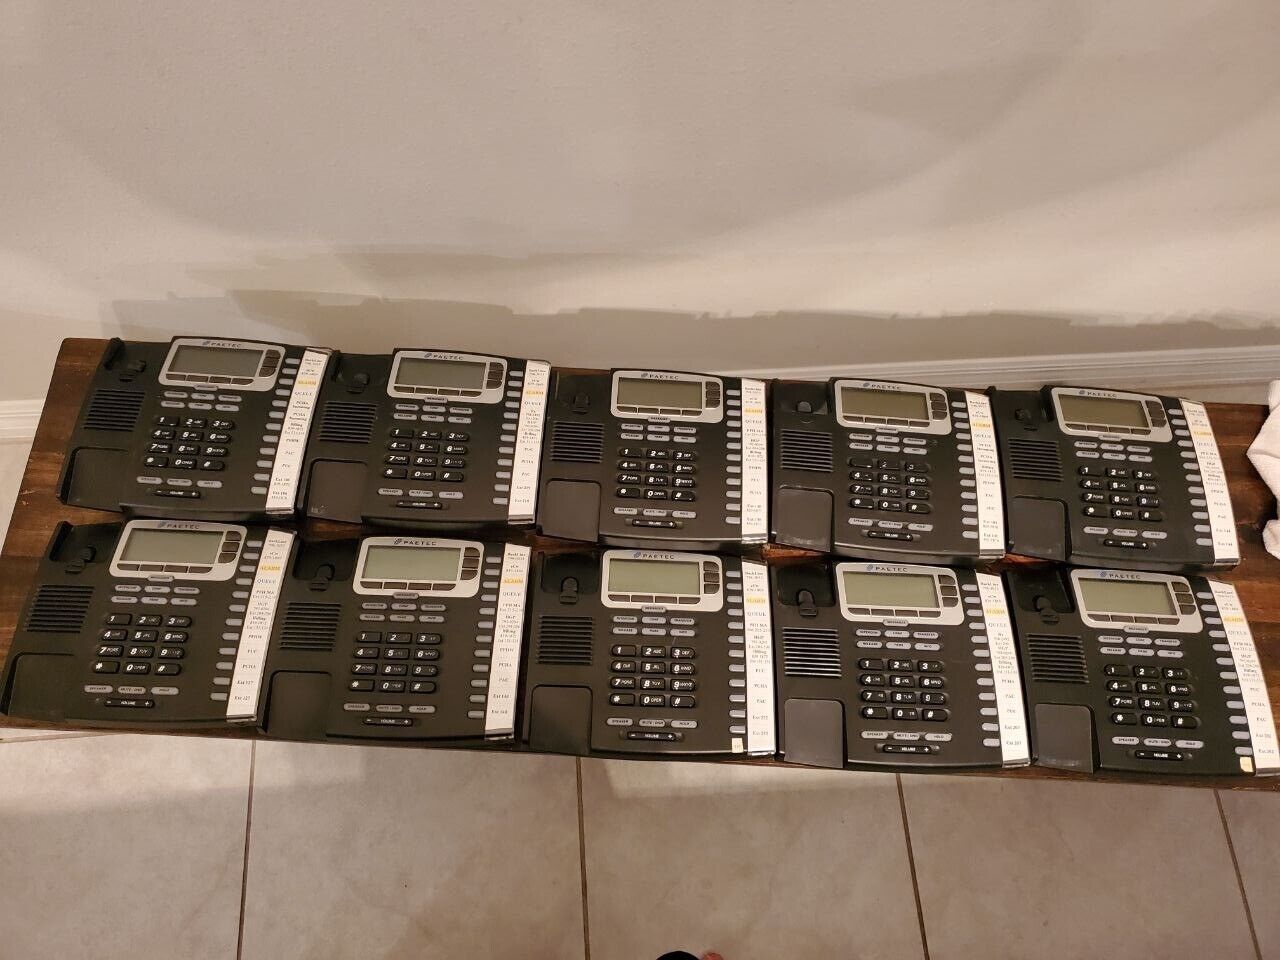 Allworx Paetec 9212P 8110051 Voip Display Phone - LOT OF 12 With Handset & Stand